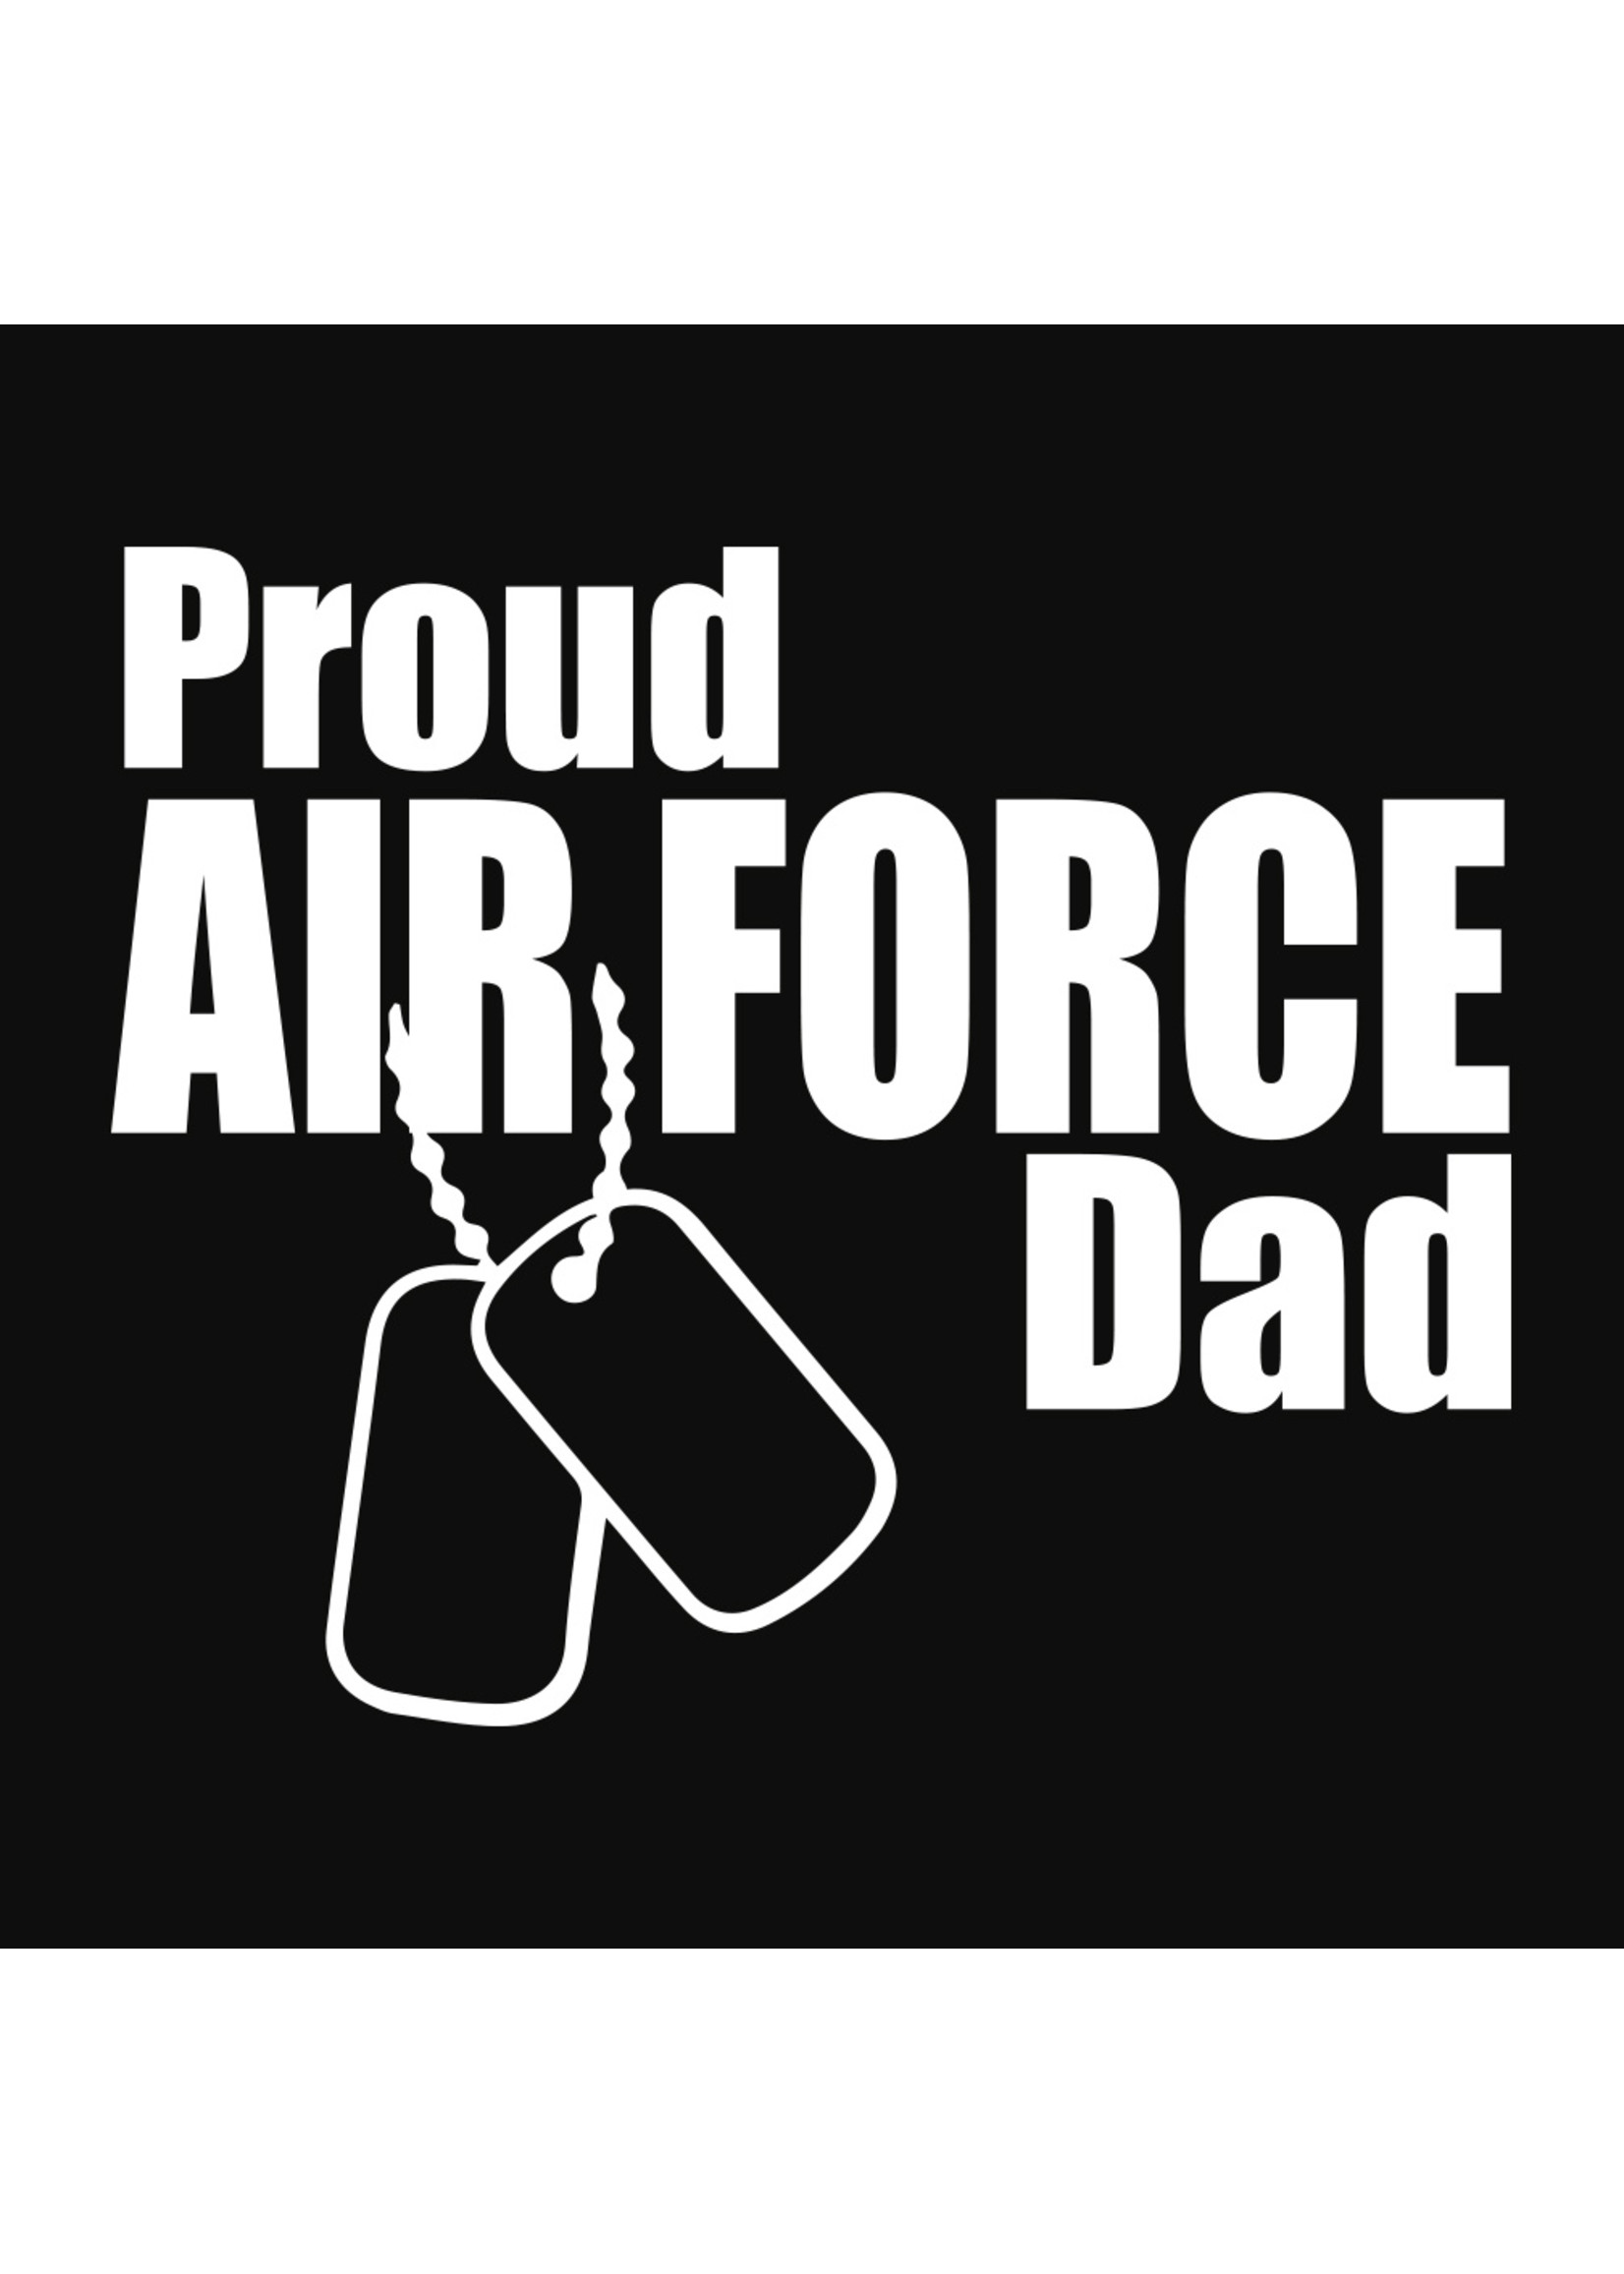 Air Force Dad  Dog Tags Decal